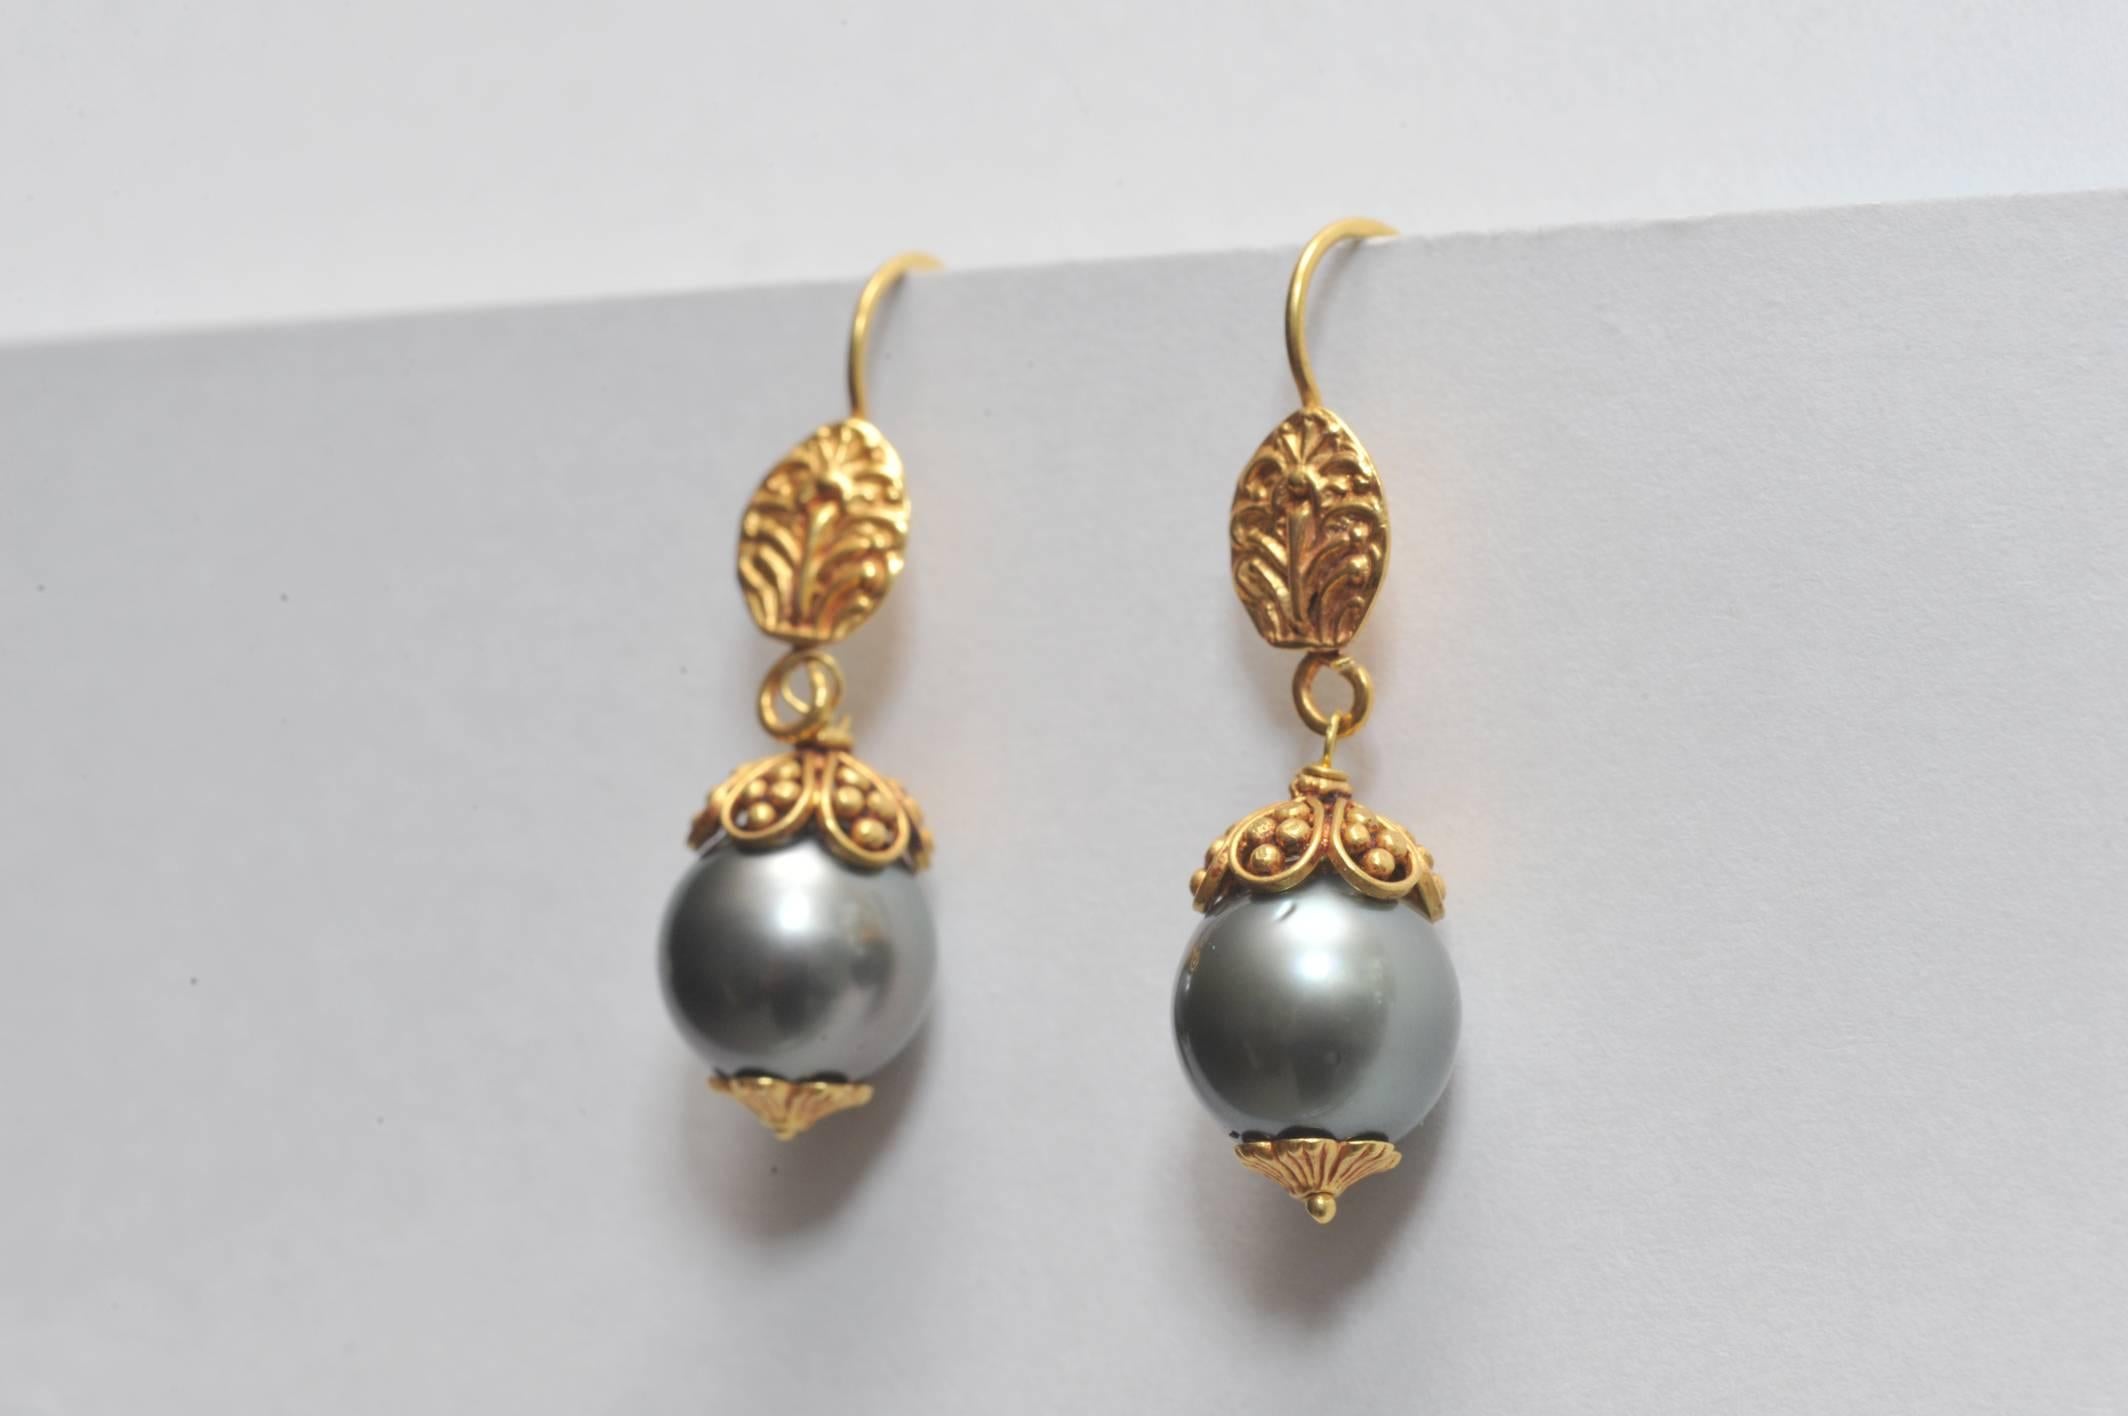 Lovely 9.5 mm Tahitian pearls bordered in 22K gold featuring fine tooling and granulation work.  French wires for pierced ears.